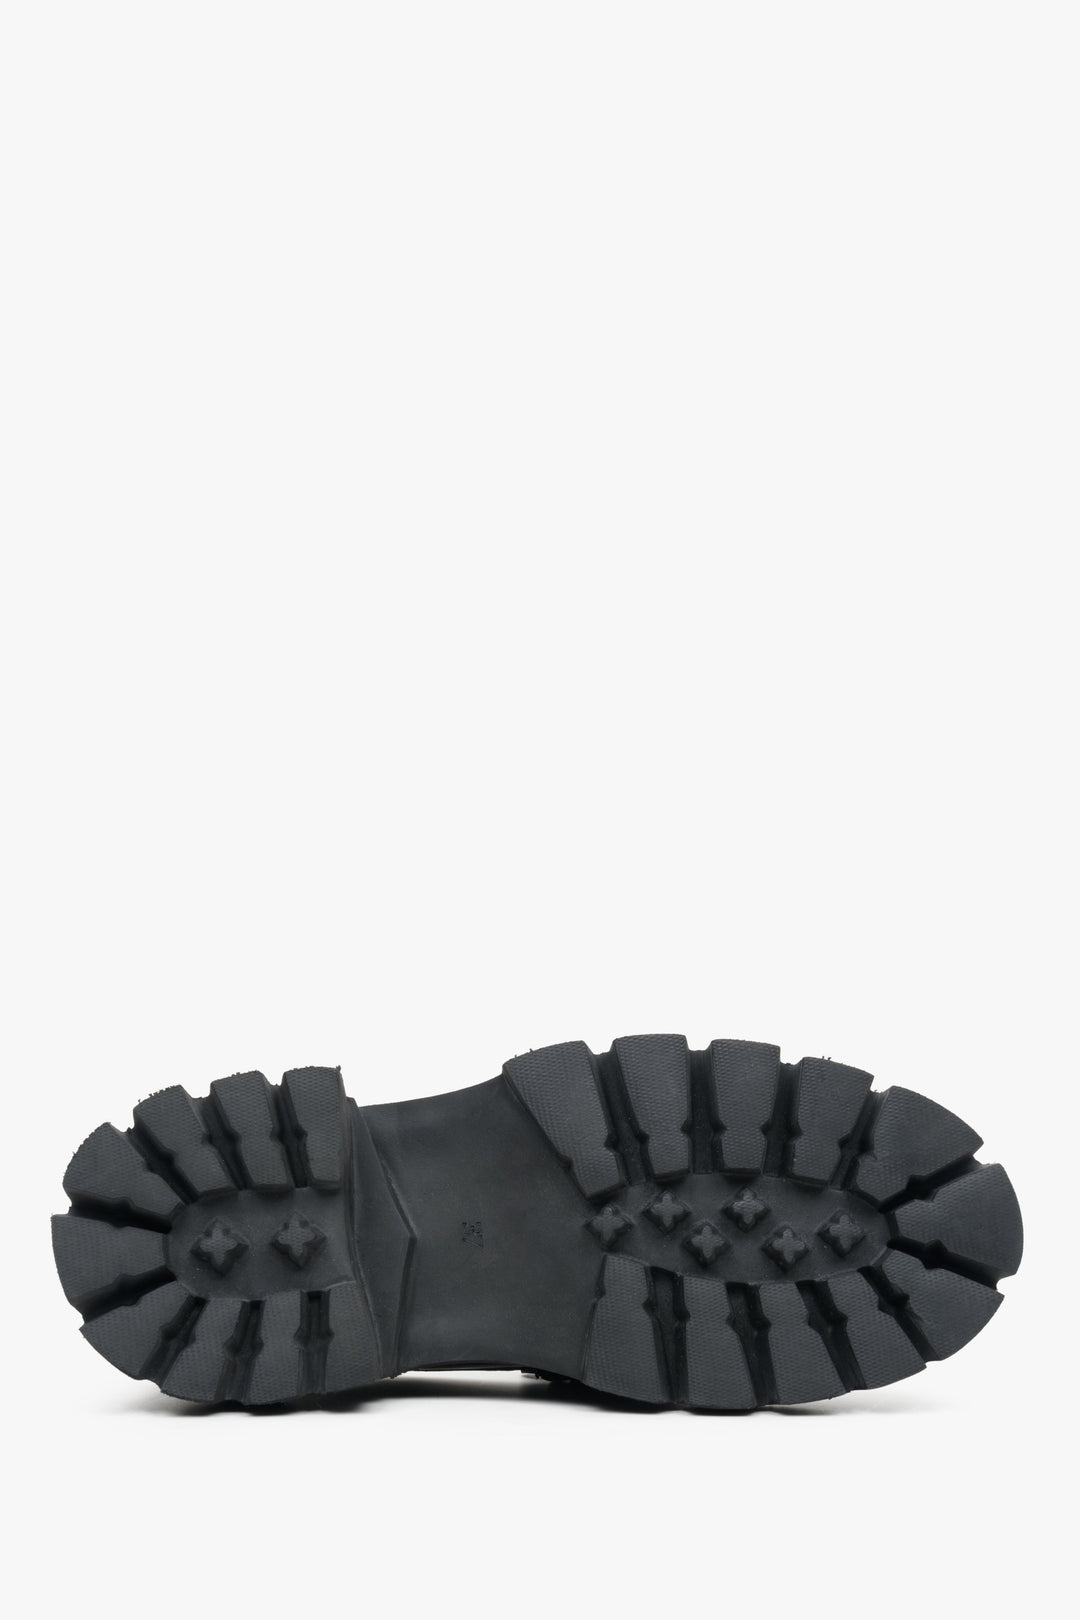 Women's leather black moccasins by Estro - close-up on the sole.